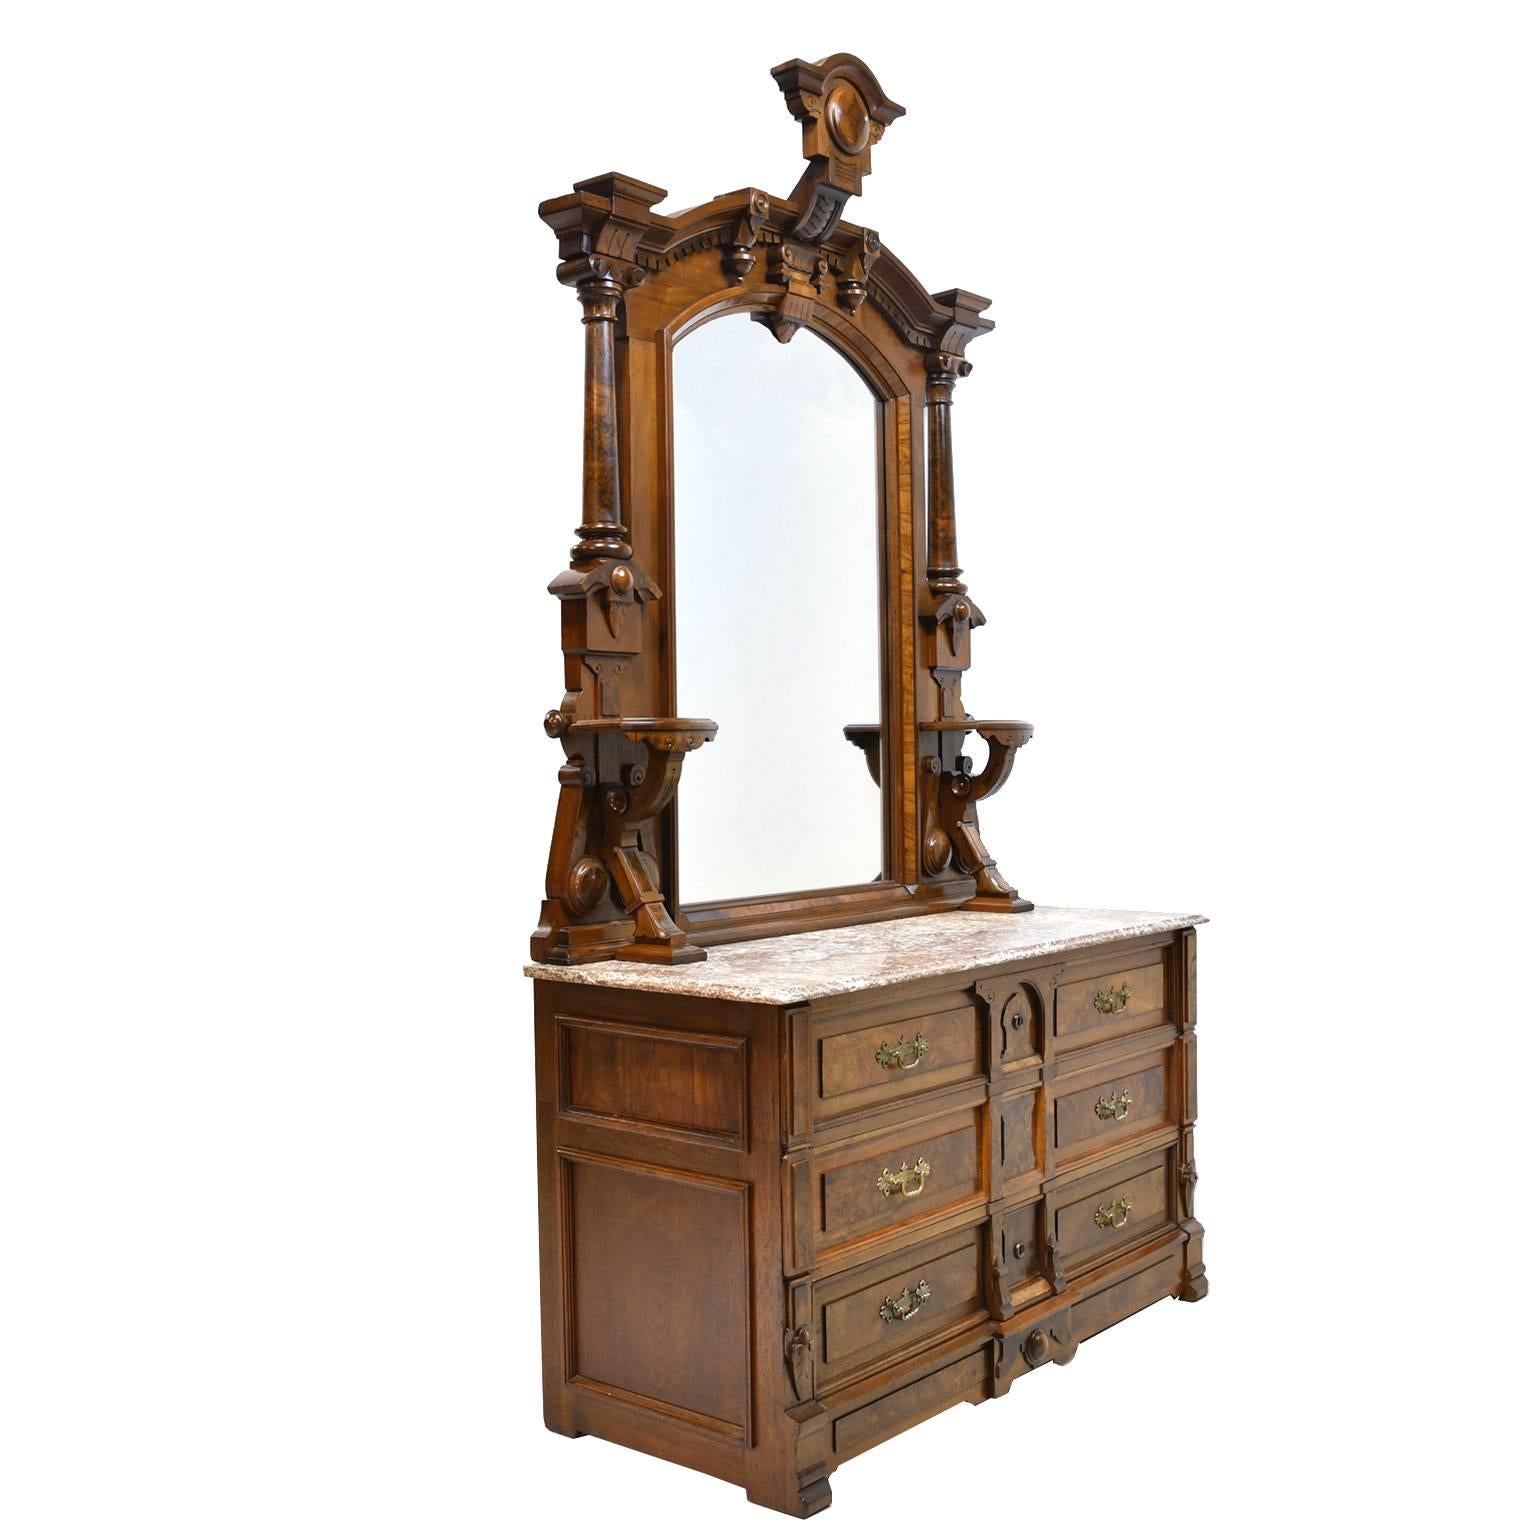 Perfect cabinet to drop in a sink for a bathroom vanity. A stunning monumental chest of drawers in walnut with mirror resting on original reddish brown & white marble top, with raised decorative panels in figured & burl walnut. Shows expert